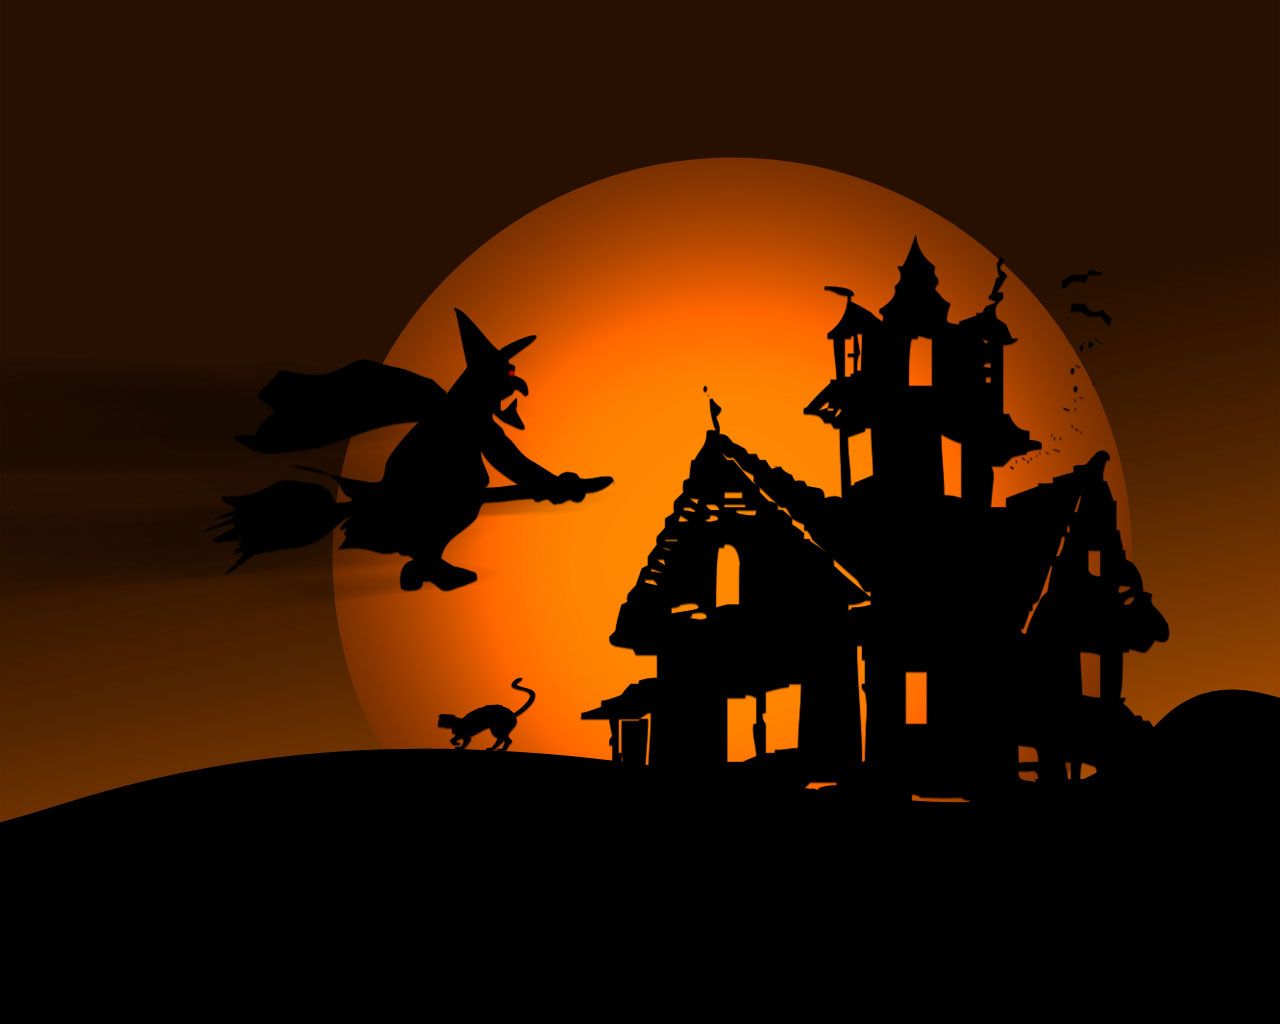 Scary Happy Halloween 2015 Images, Backgrounds, Wallpapers, Ideas